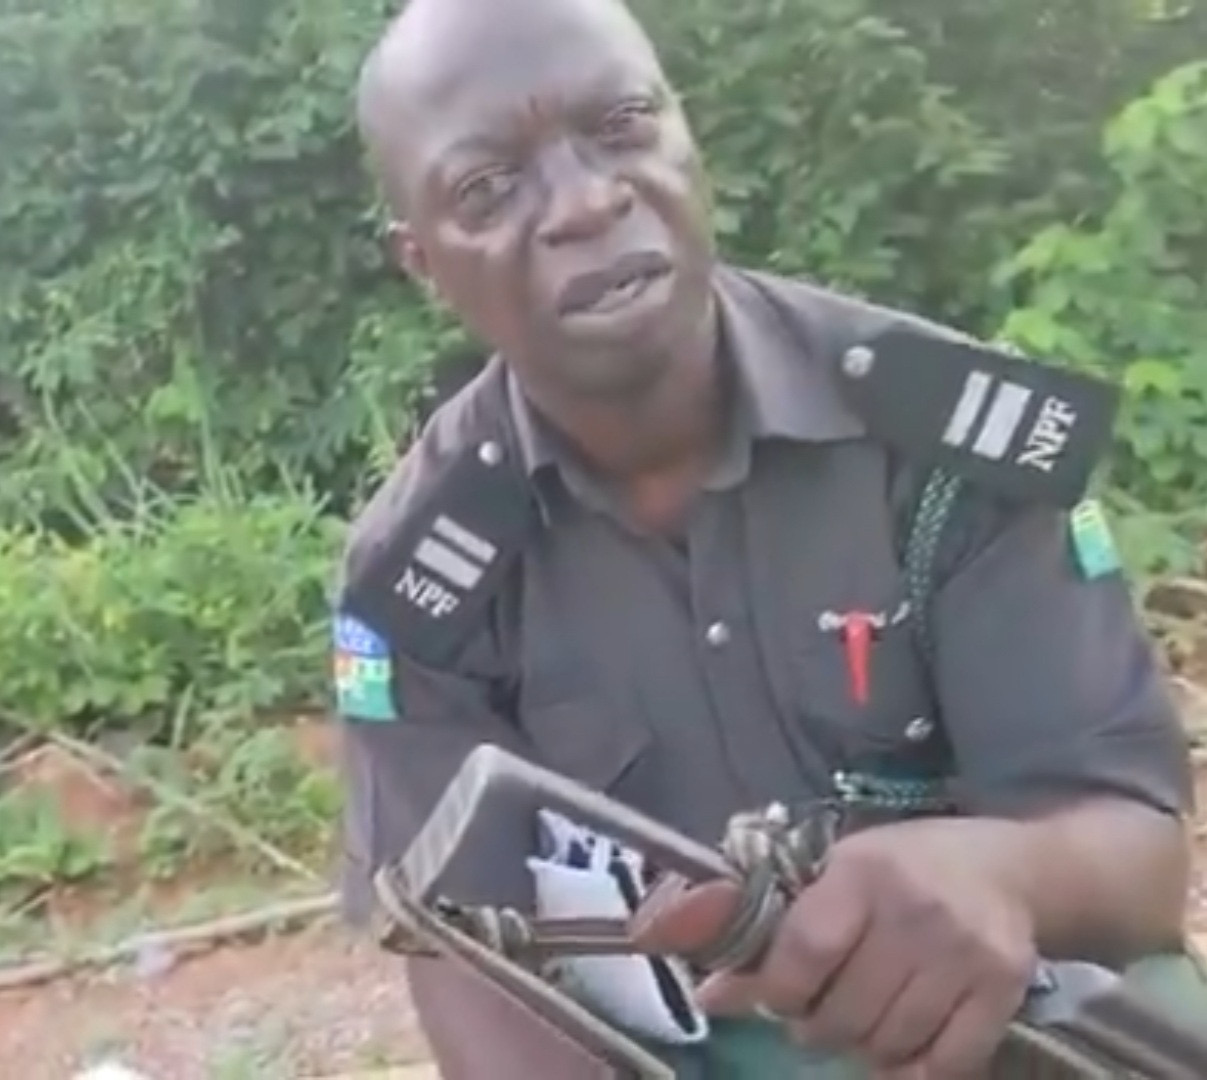 ‘I Don't Want Transfer, I Want Cash’ - Bribe-Seeking Police Officer Tells Man Driving Without A Tint Permit